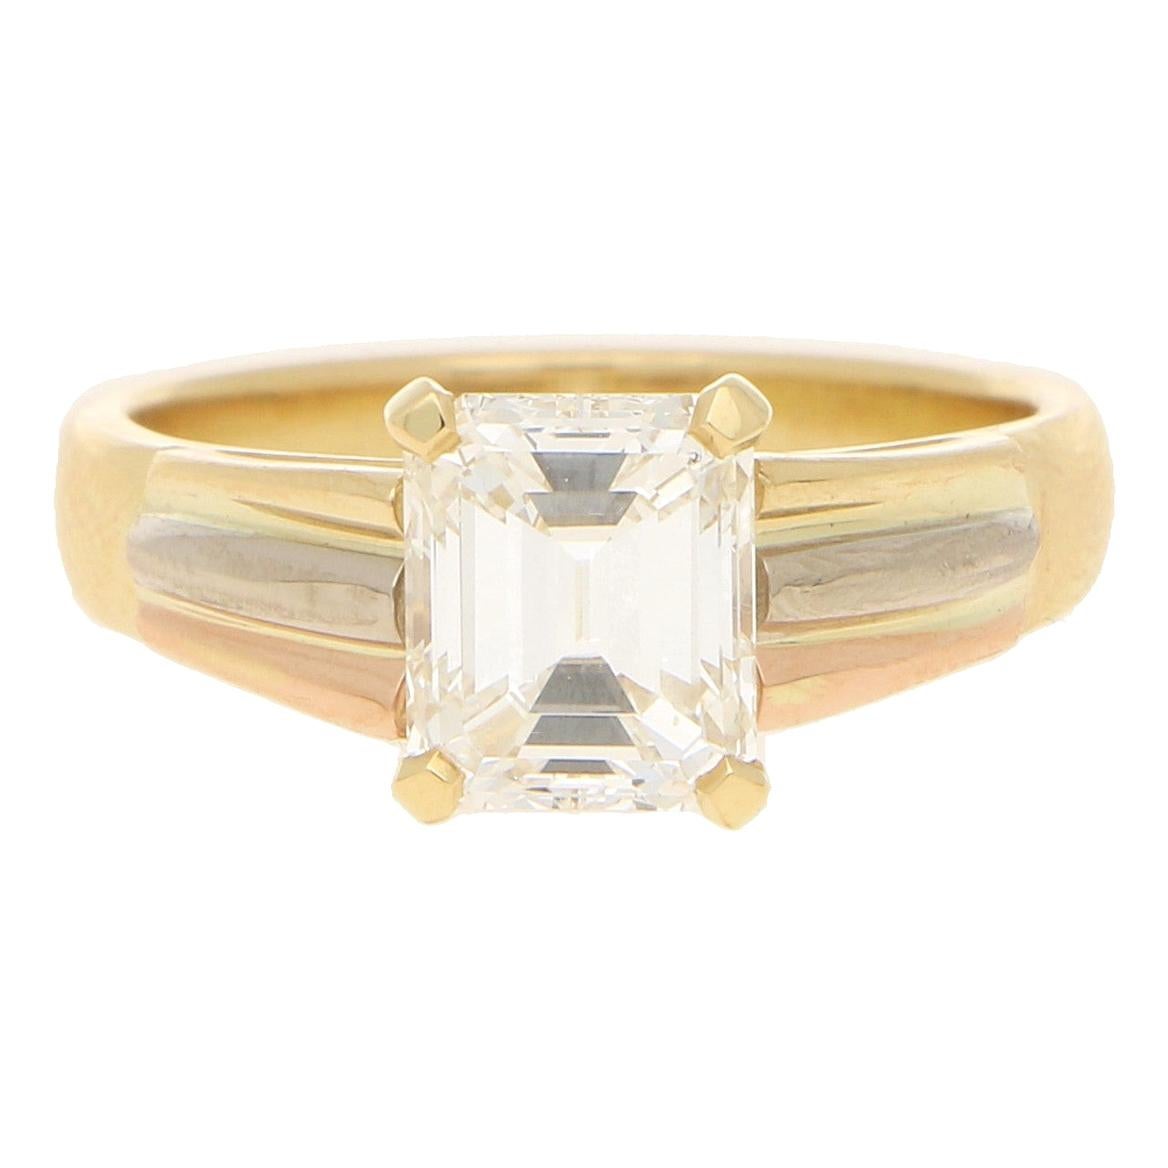 GIA Certified Emerald Cut Diamond Engagement Ring in 18k Tricolor Gold